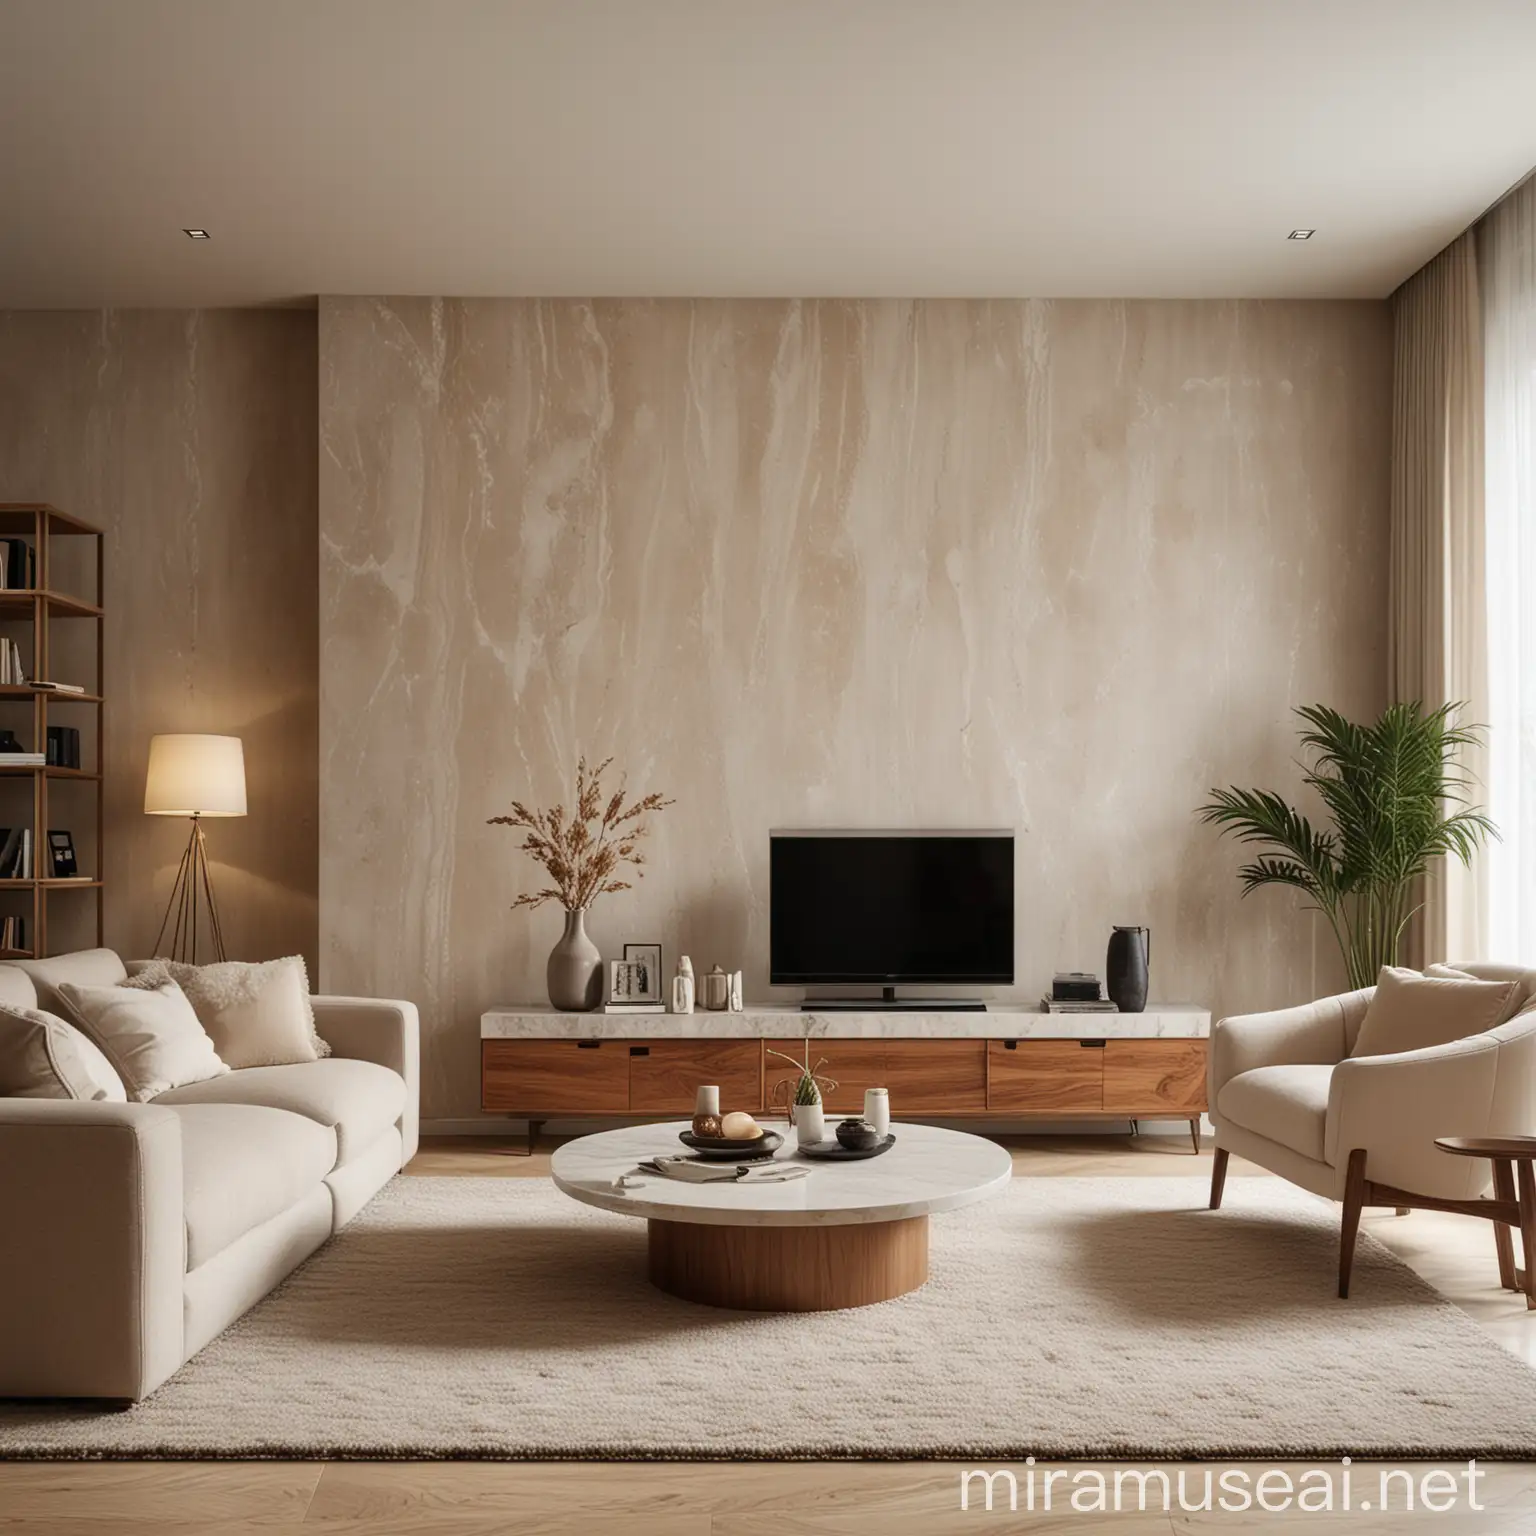 Luxury Contemporary Living Room with Plush Rugs and Nordic Modern Decor